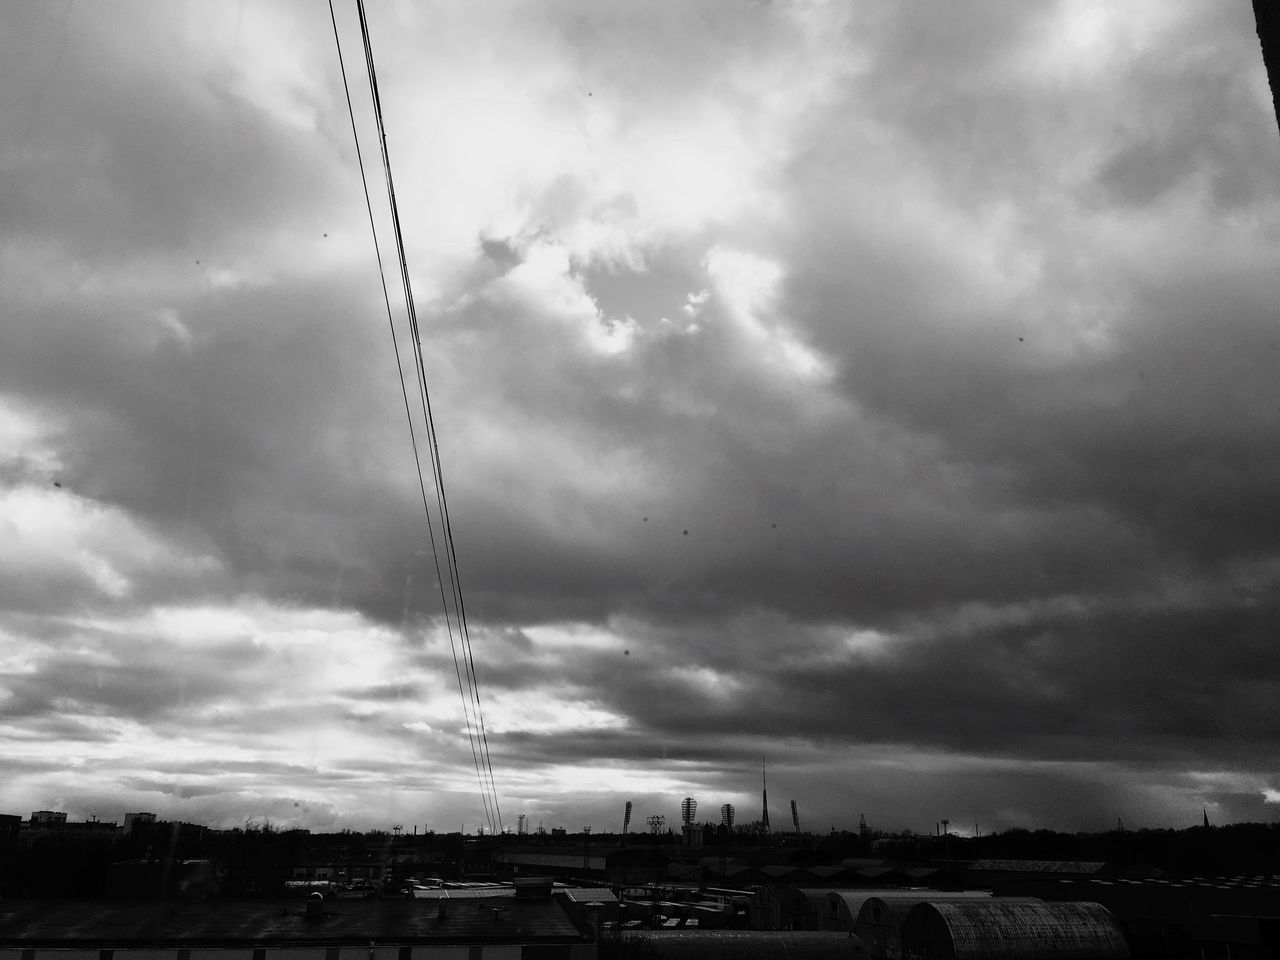 cloud - sky, sky, electricity, no people, outdoors, storm cloud, nature, day, architecture